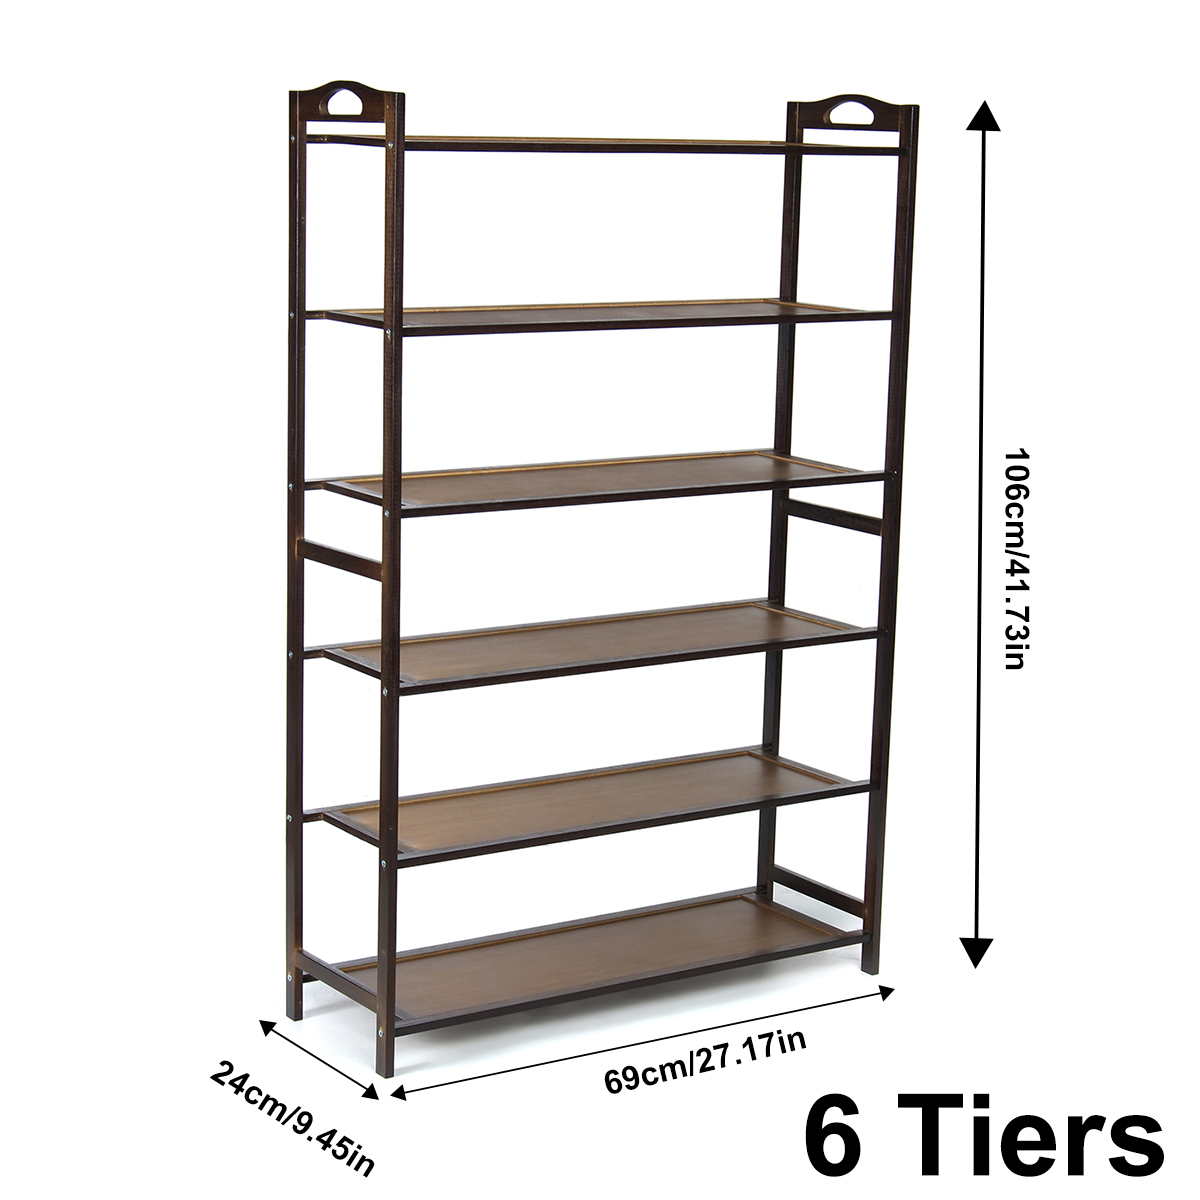 3456-Tiers-Shoe-Rack-Multi-layers-Storage-Shelf-Space-Saving-Organizer-Books-Decorations-Stand-for-H-1800948-7